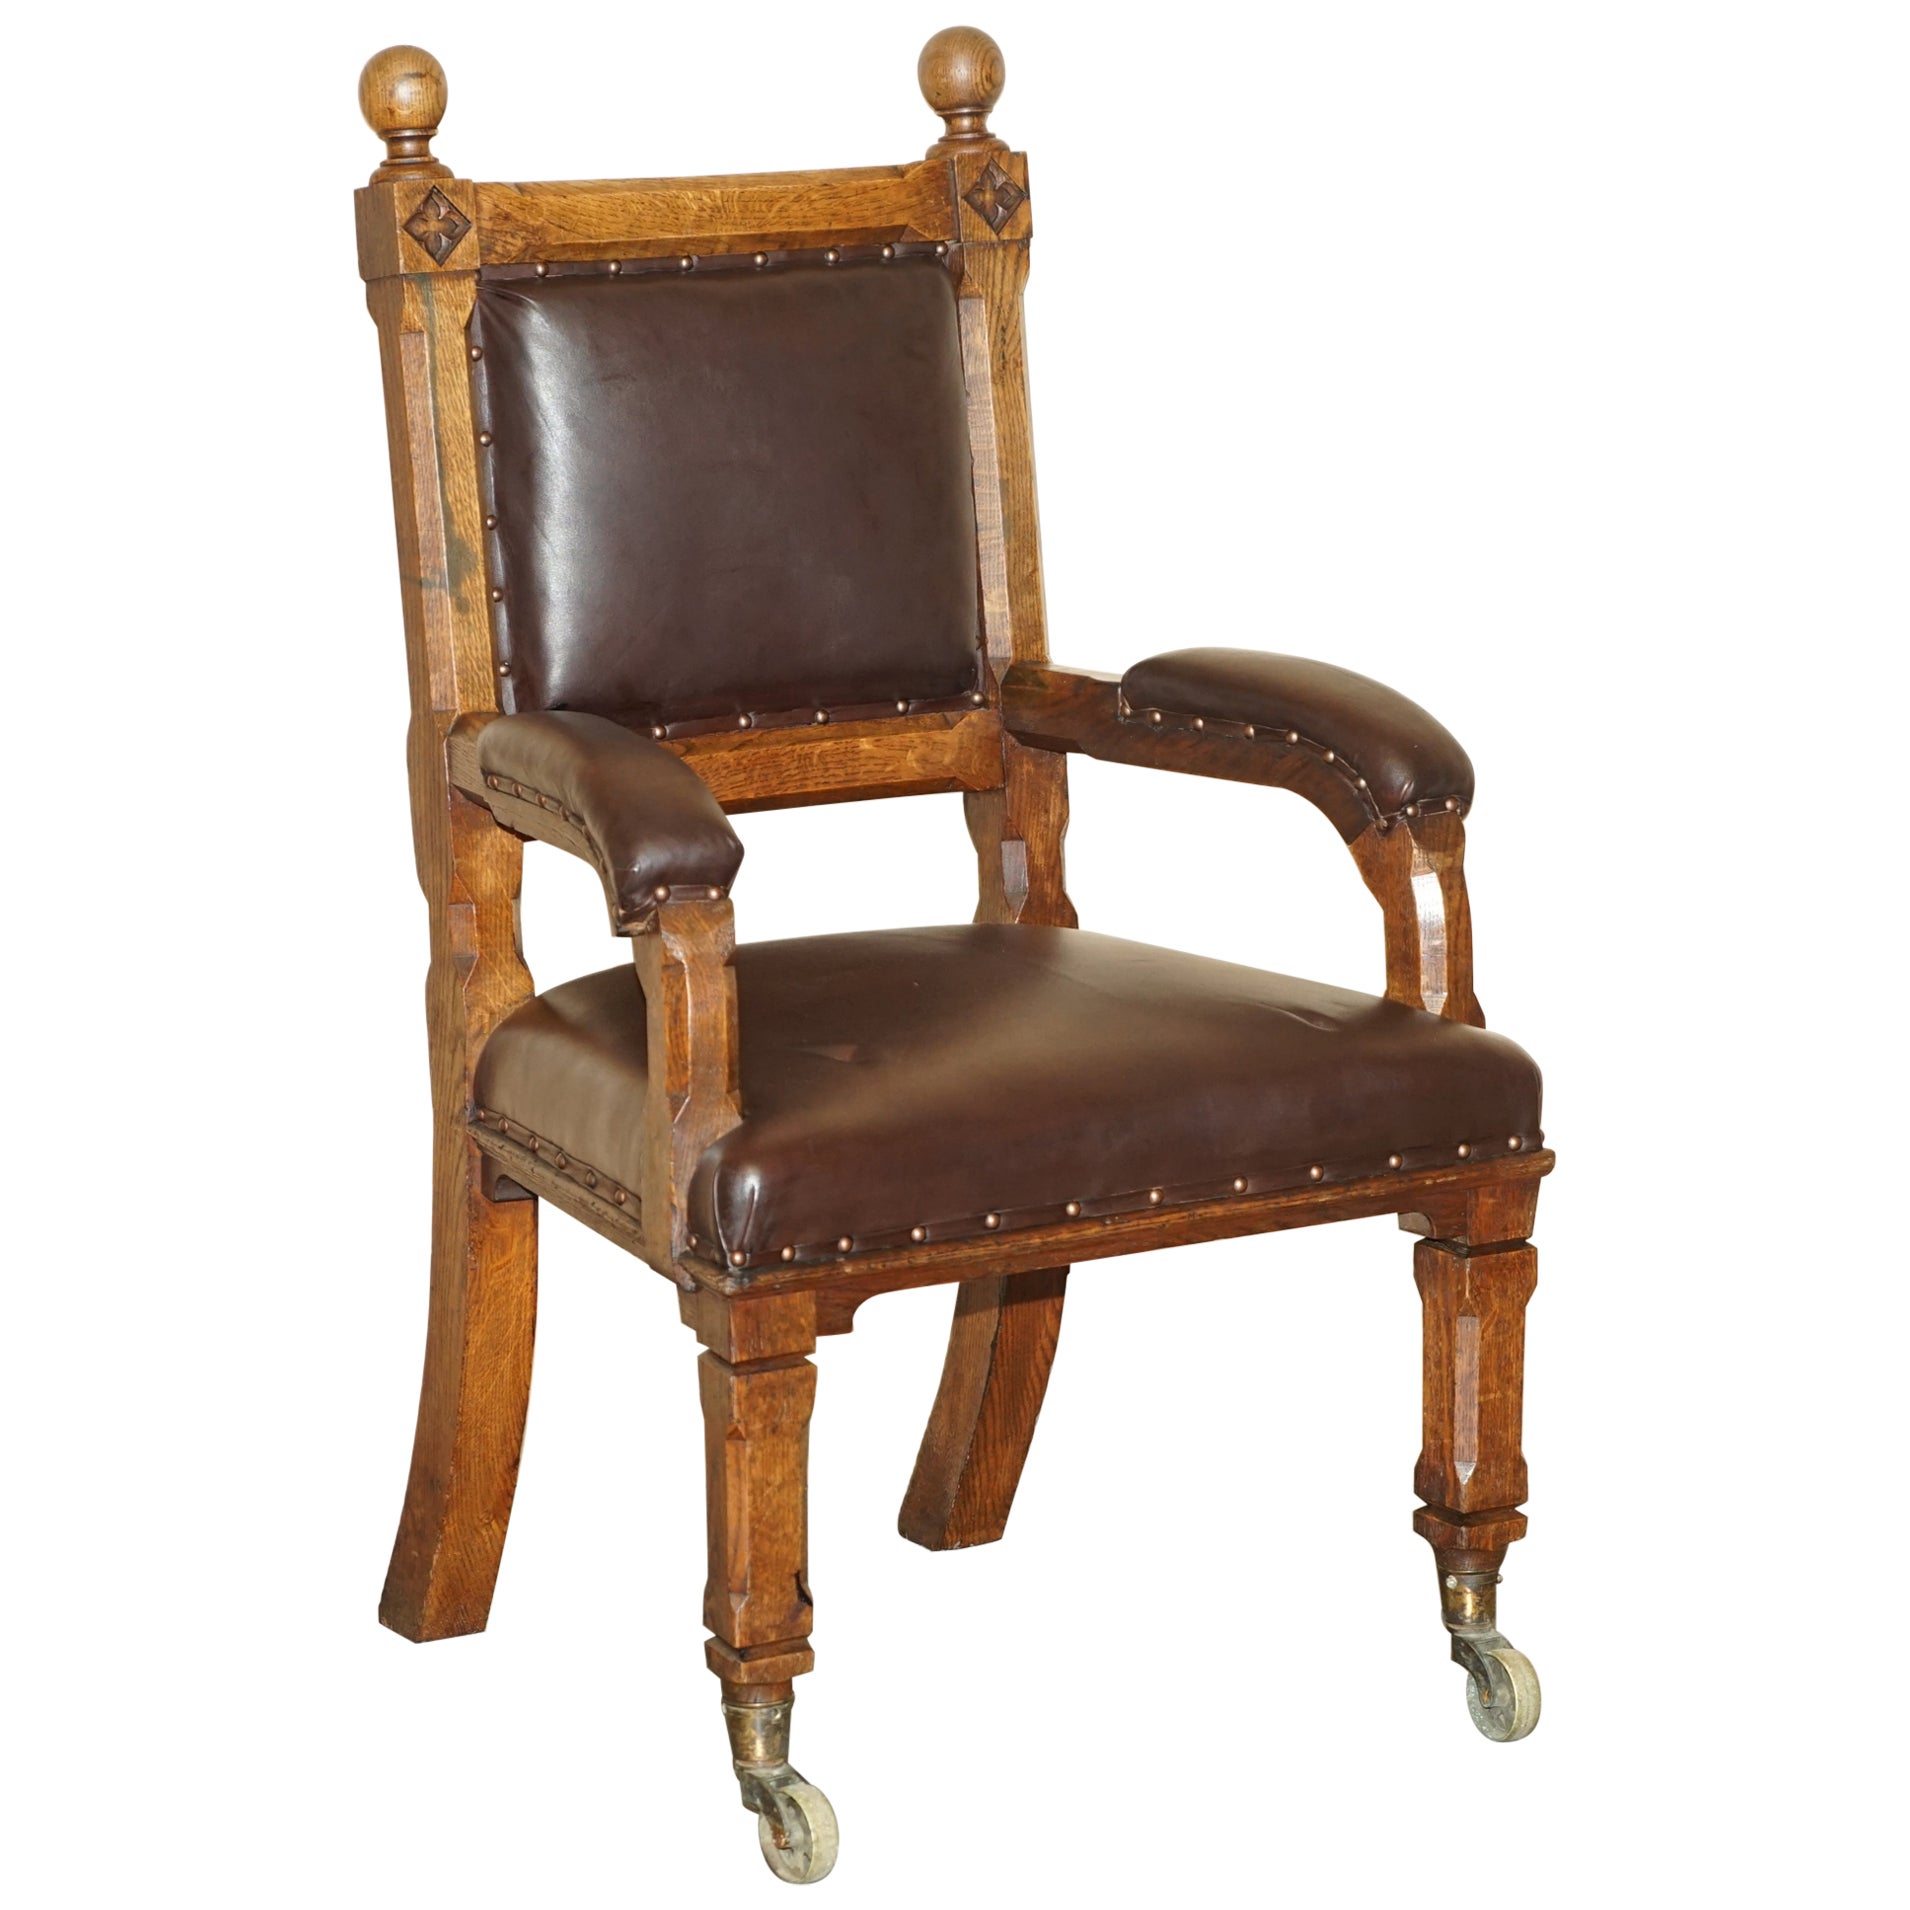 STUNNING ANTIQUE CIRCA 1880 GOTHIC REViVAL OAK PUGIN STYLE CARVER ARMCHAIR For Sale